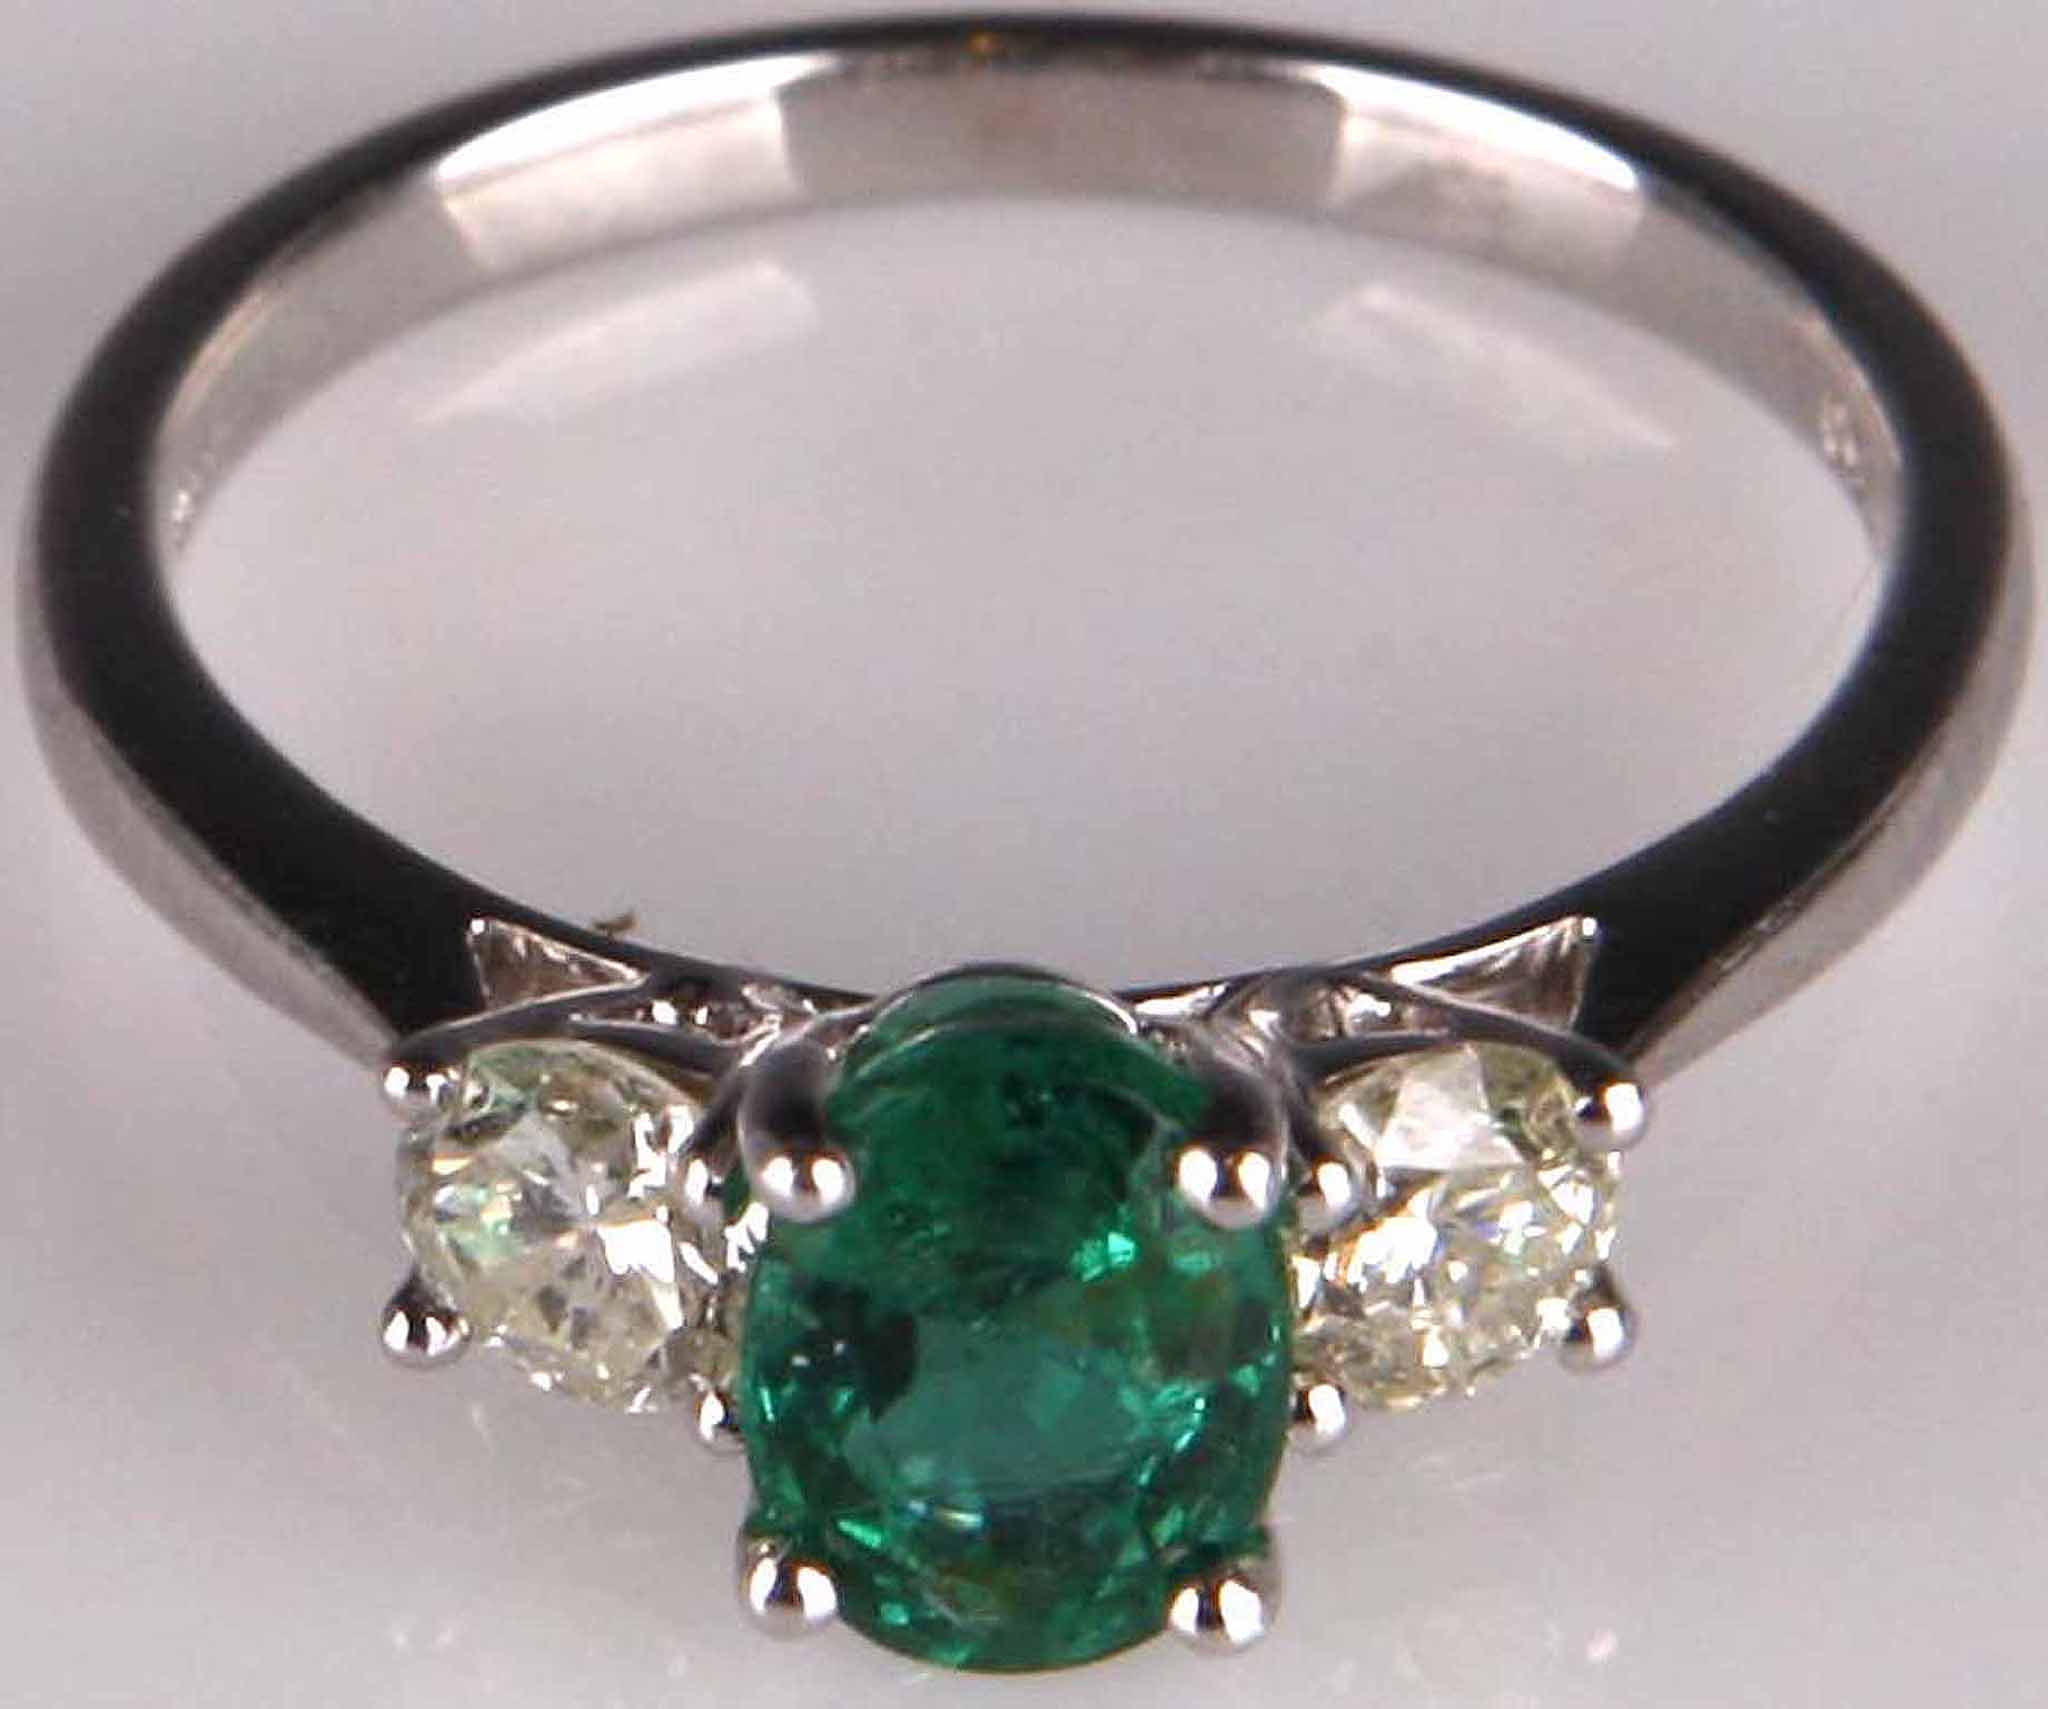 An 18ct white gold, emerald and diamond set ring (emerald 0.89ct, dia 0.52ct).